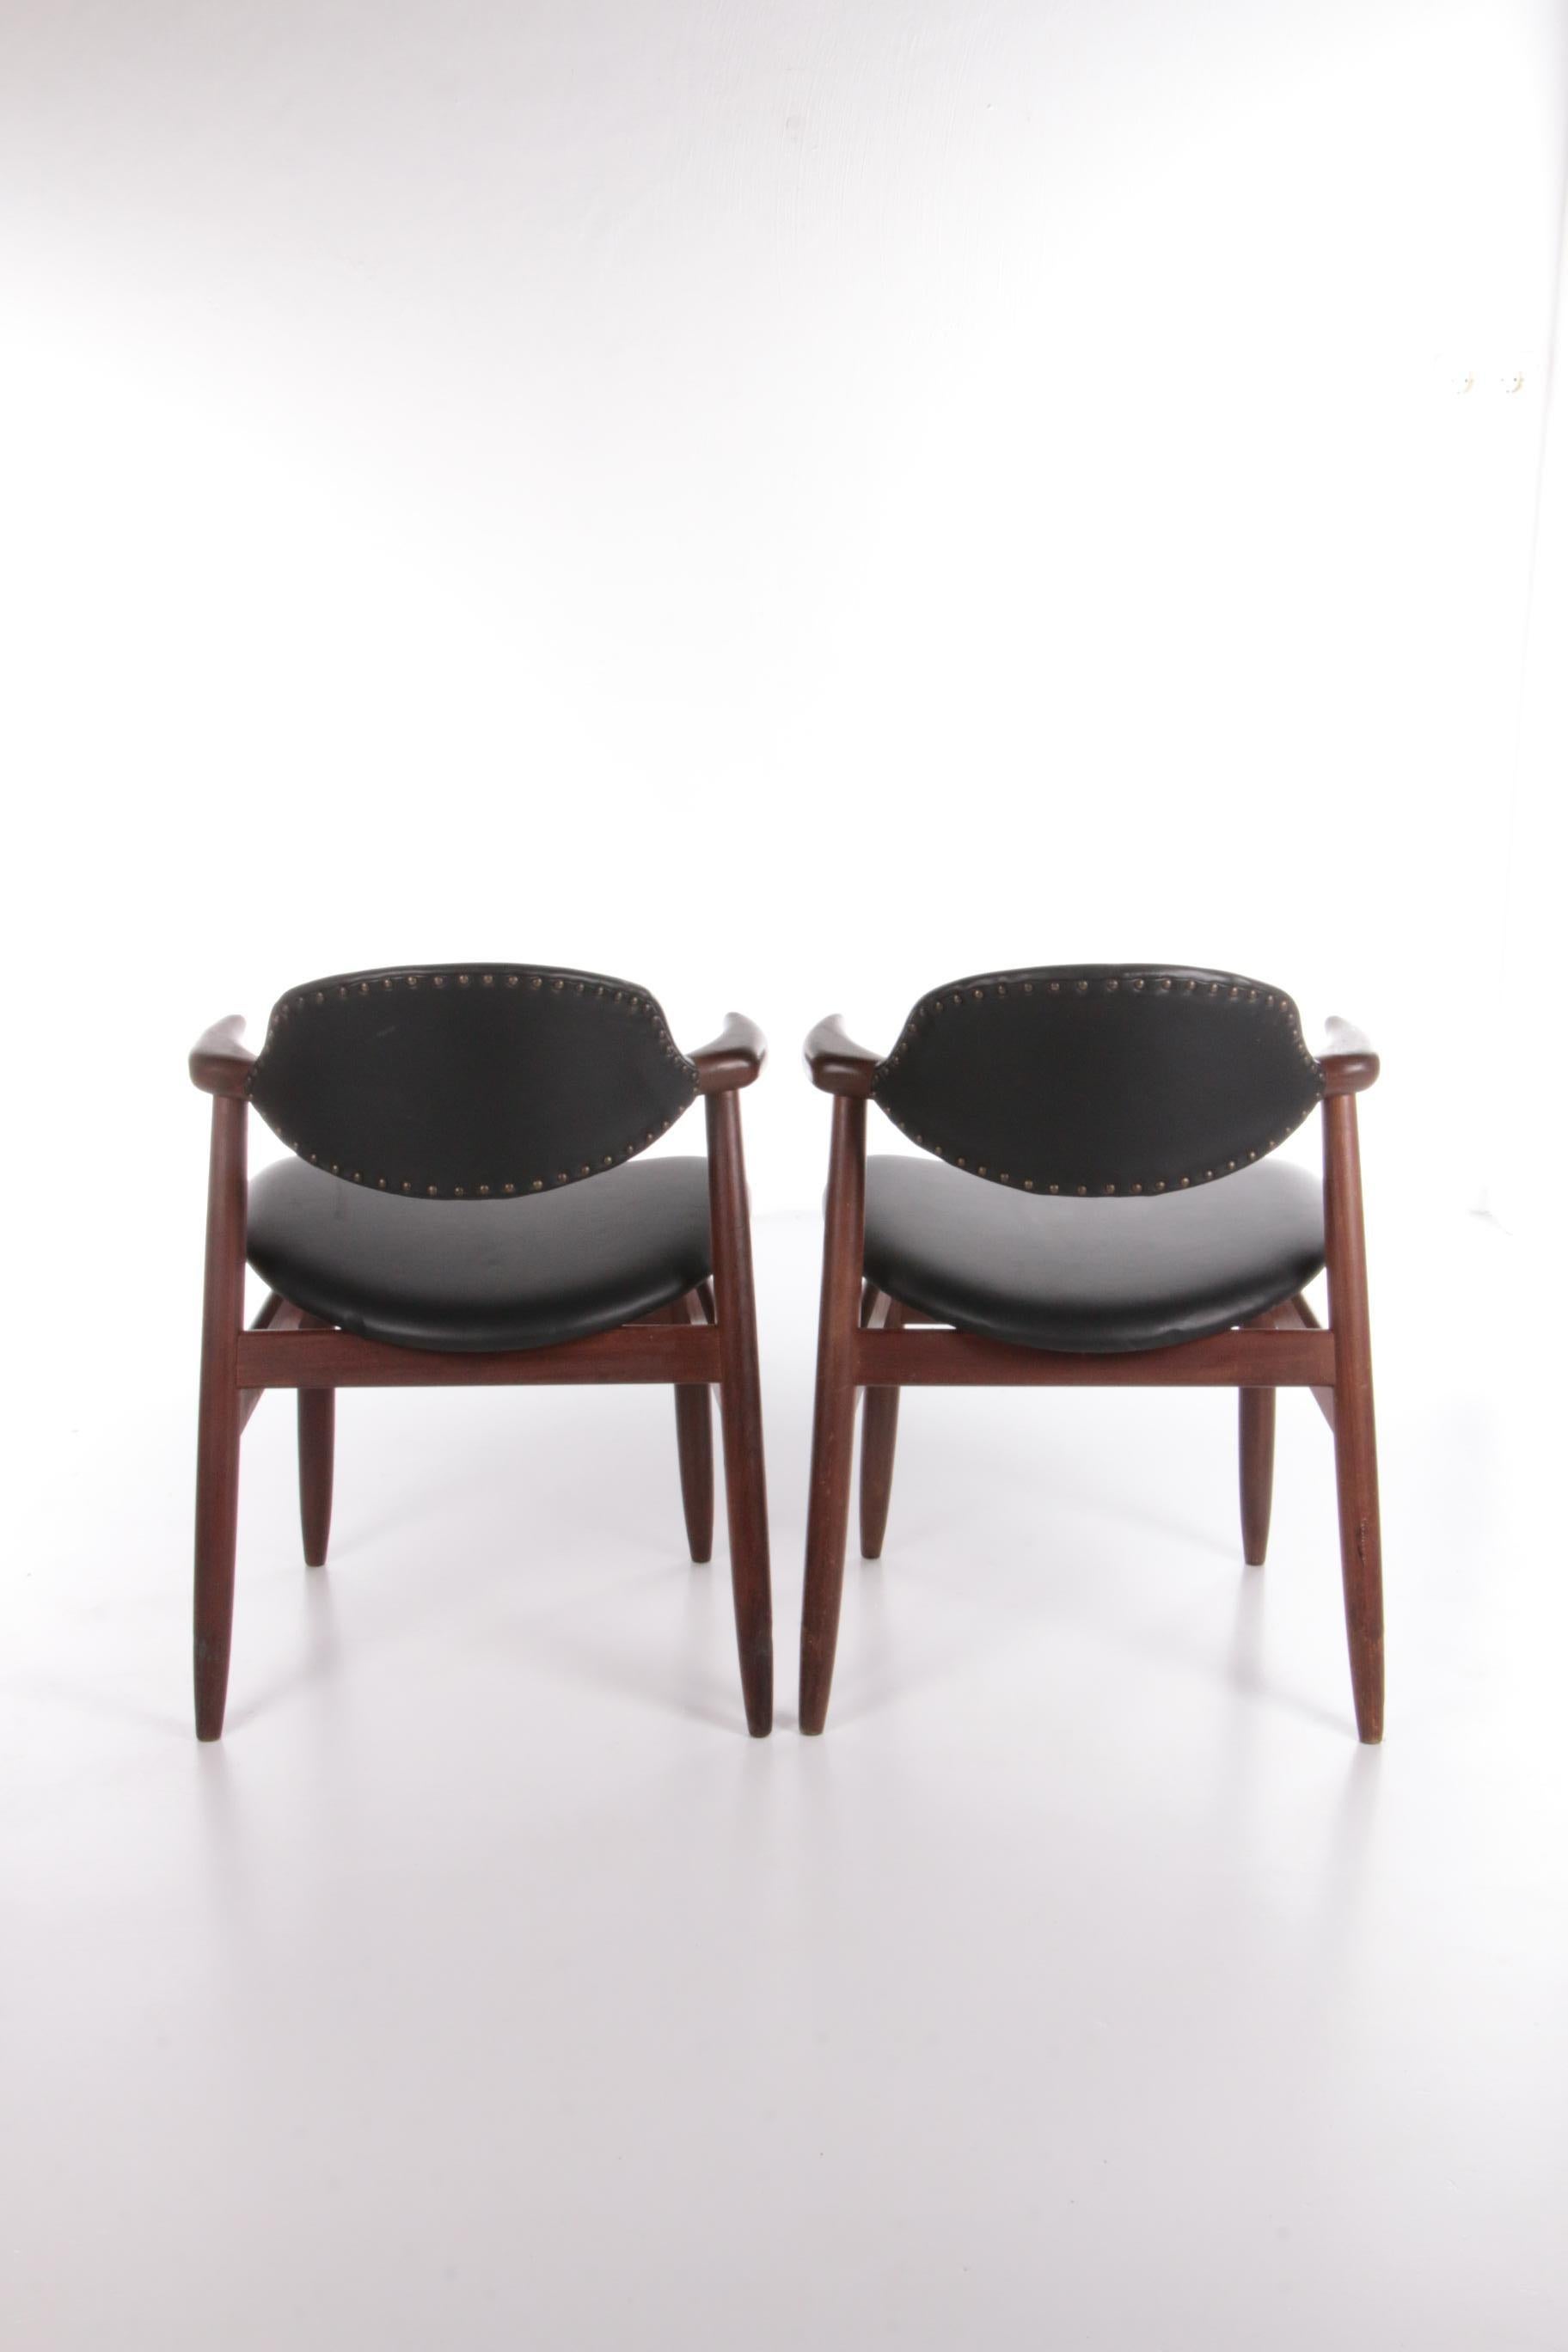 Dutch Set of two Cowhorn chairs by Tijsseling for Hulmefa, 1950s